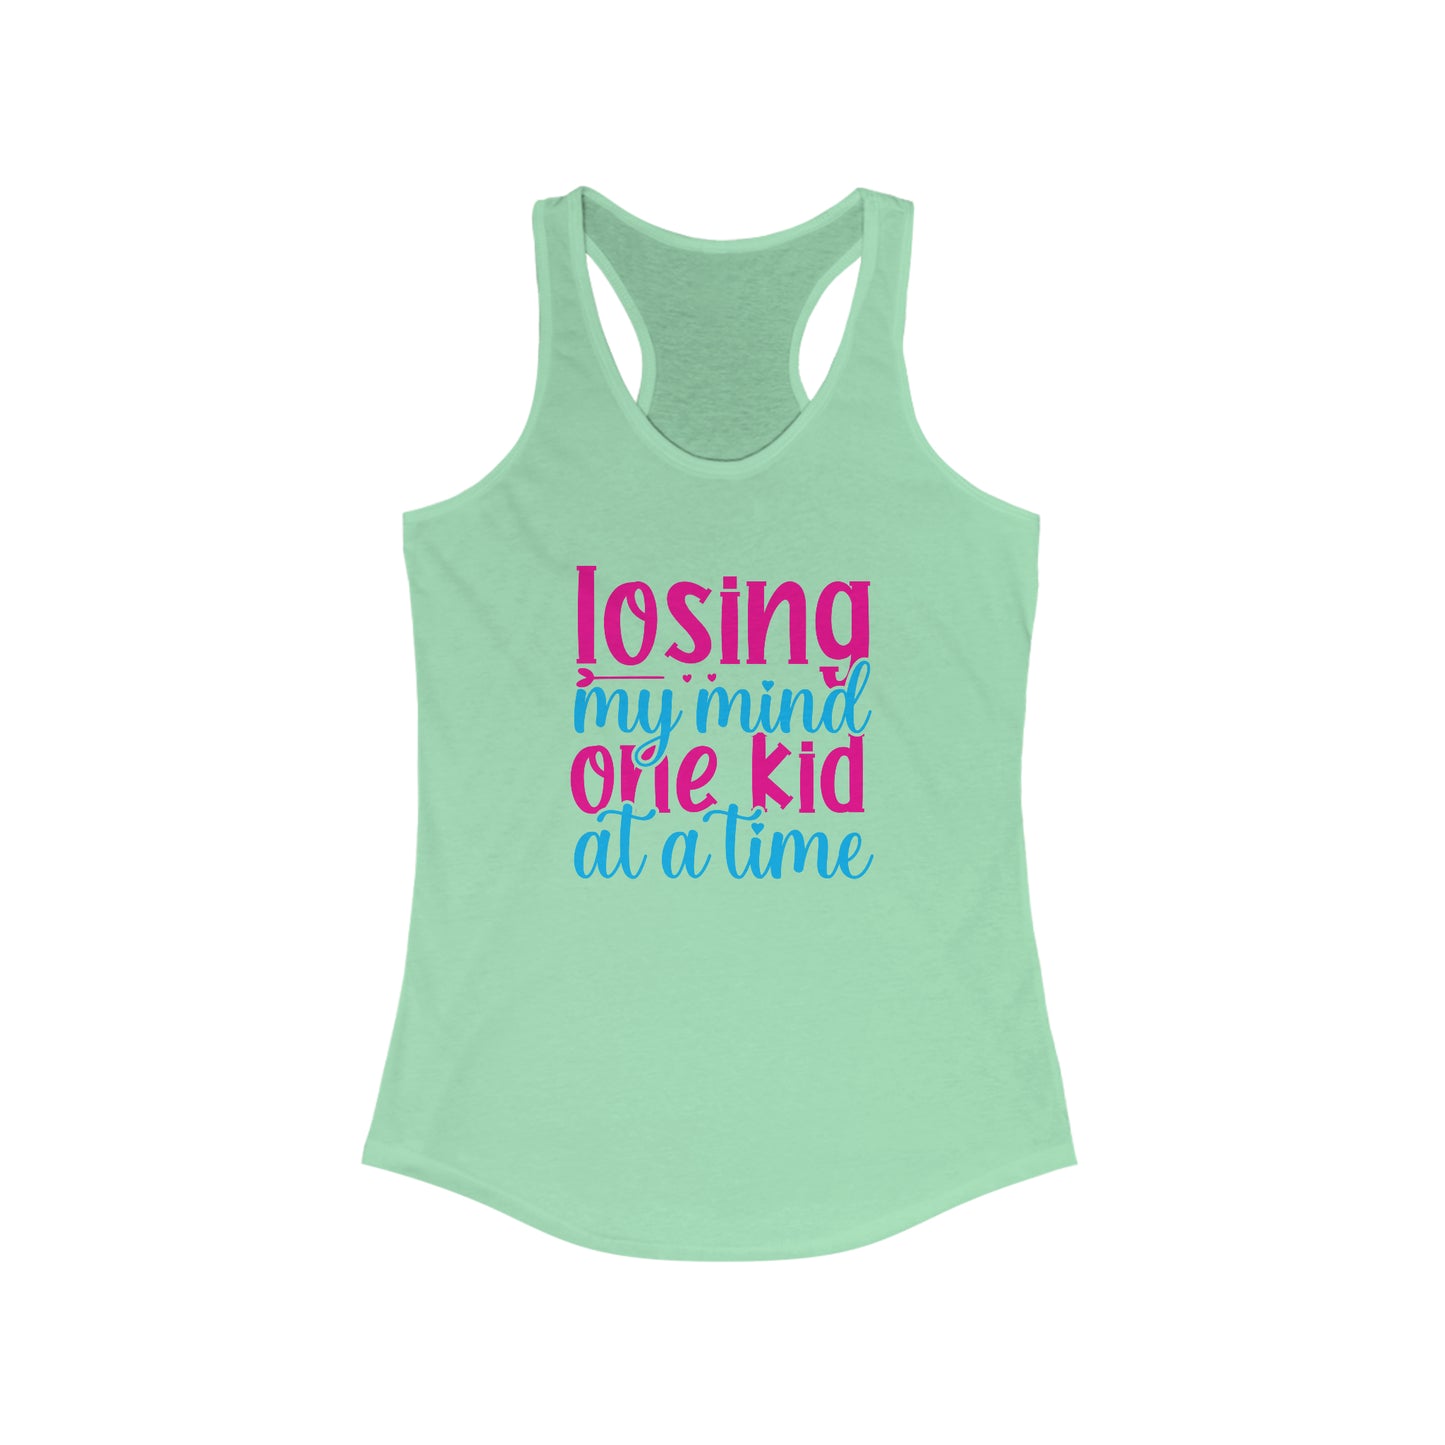 Losing My Mind One Kid at a Time - Racerback Tank